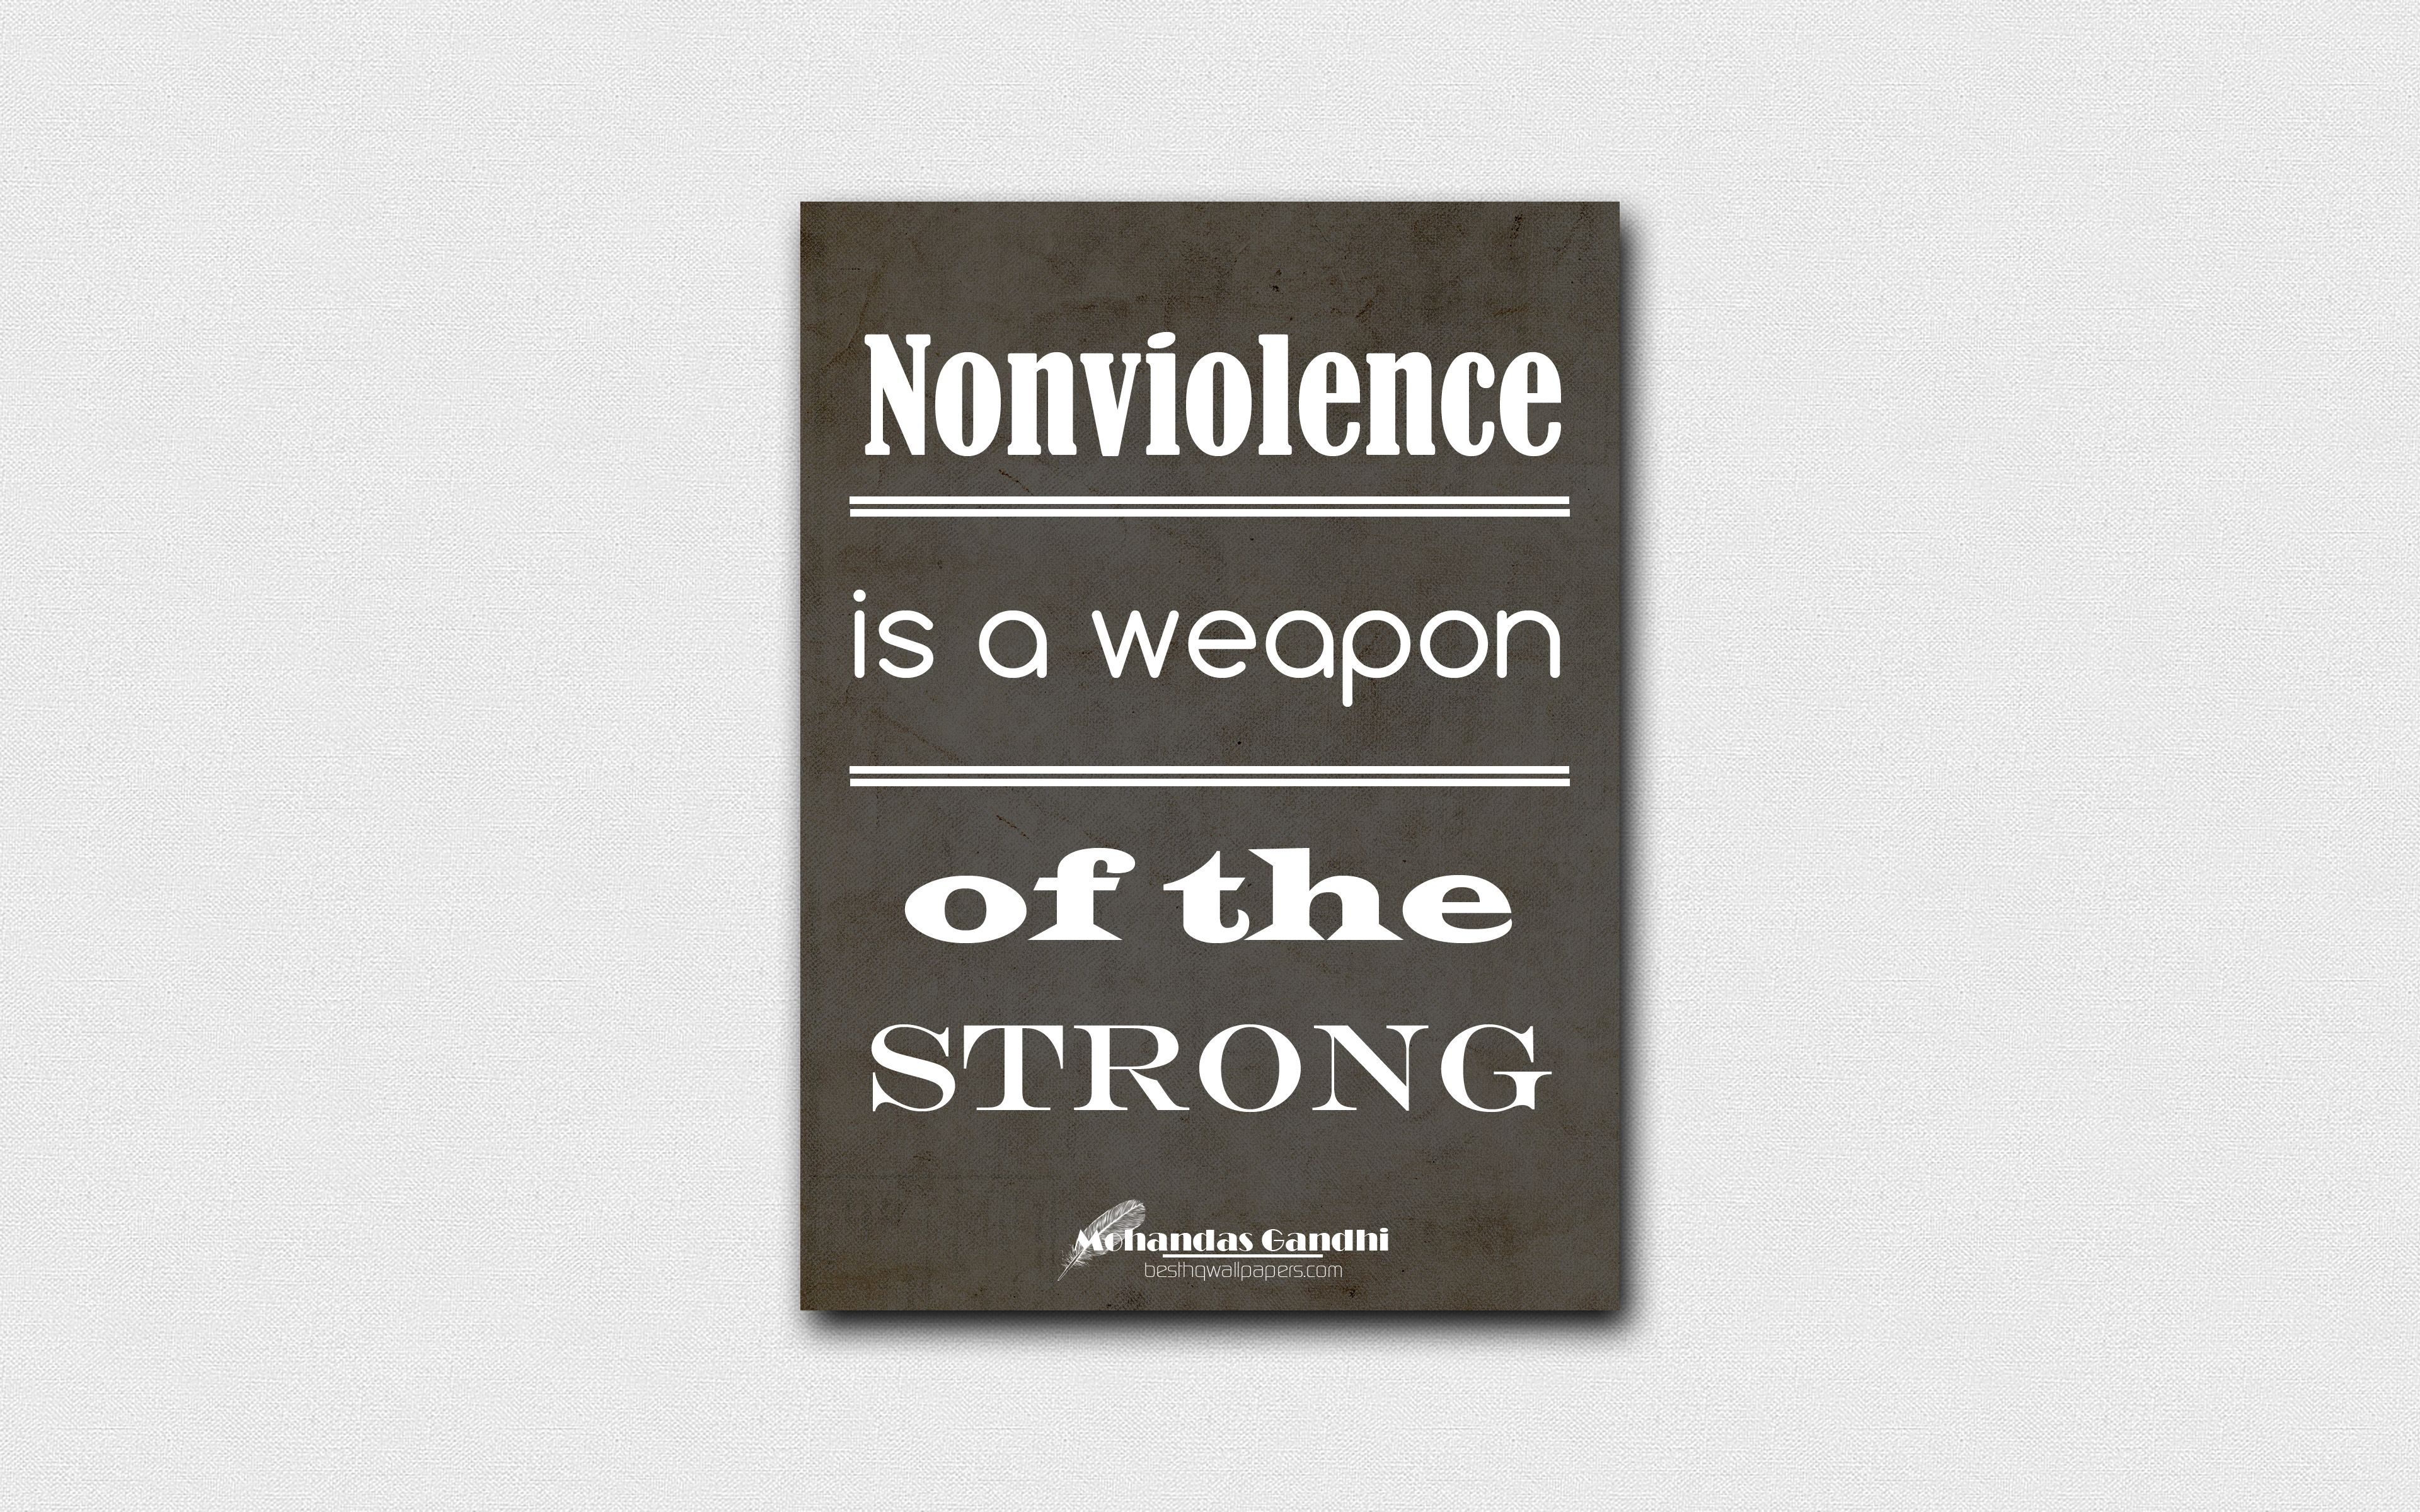 Download wallpaper 4k, Nonviolence is a weapon of the strong, quotes about nonviolence, Mohandas Gandhi, black paper, popular quotes, inspiration, Mohandas Gandhi quotes for desktop with resolution 3840x2400. High Quality HD picture